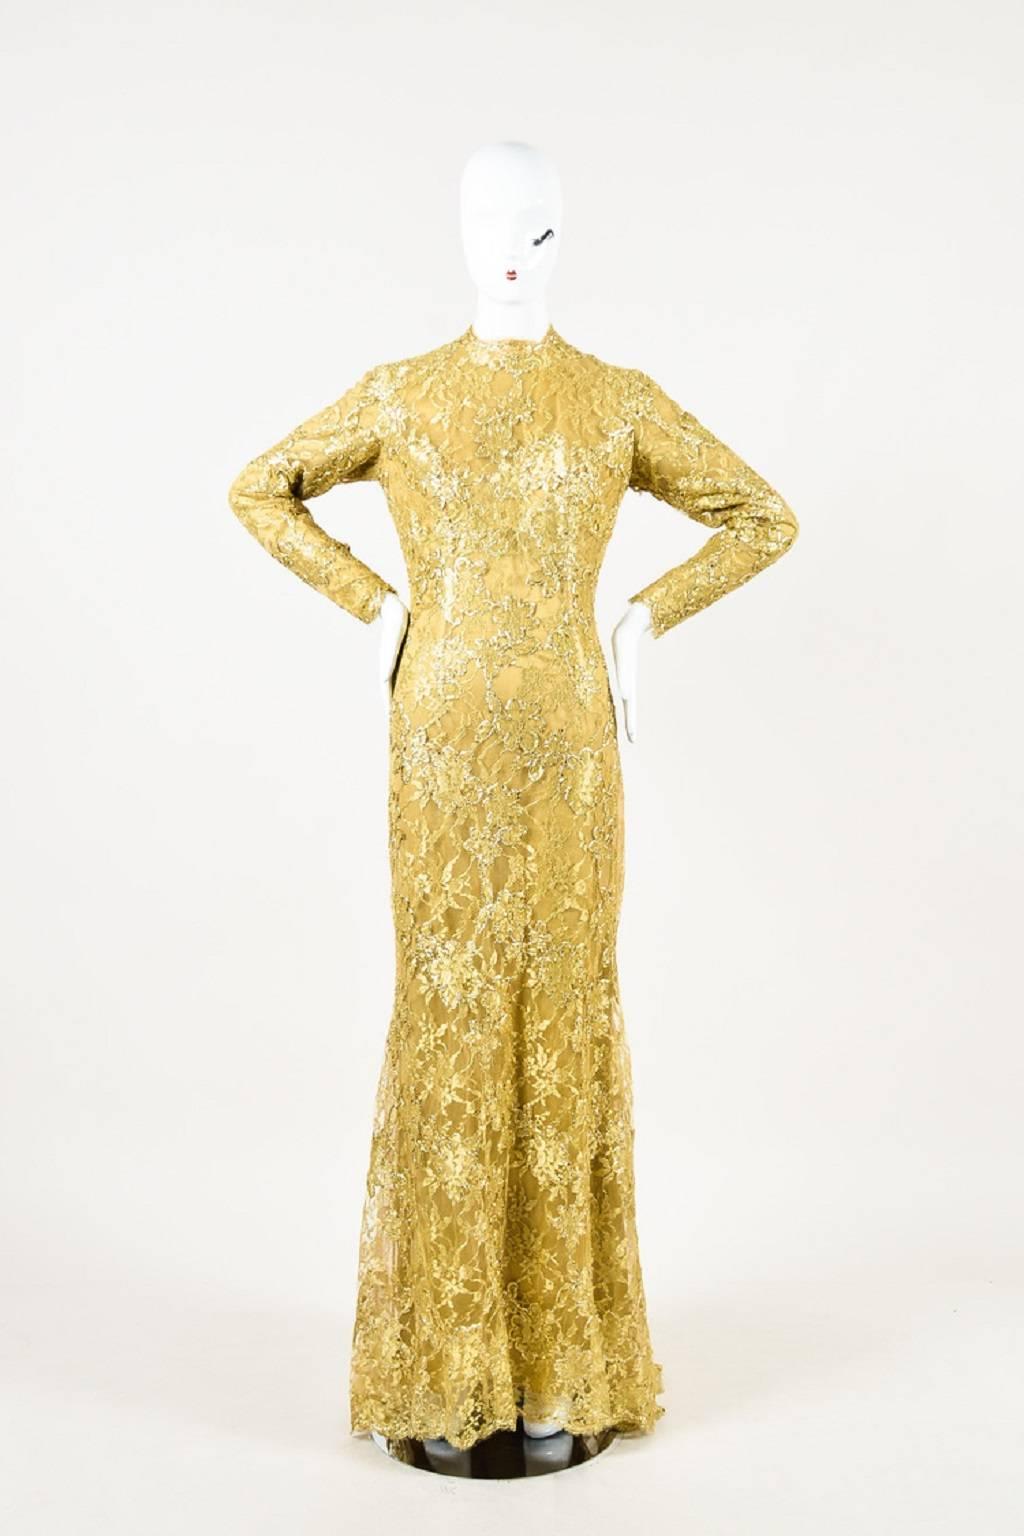 Size: Unknown, please refer to measurements.
Color: Gold Metallic
Made In: Unknown
Fabric Content: Unknown, appears to be some type of synthetic shell, silk lining

Item Specifics & Details: Comes in garment bag. Retails at $16,000. Gorgeous and